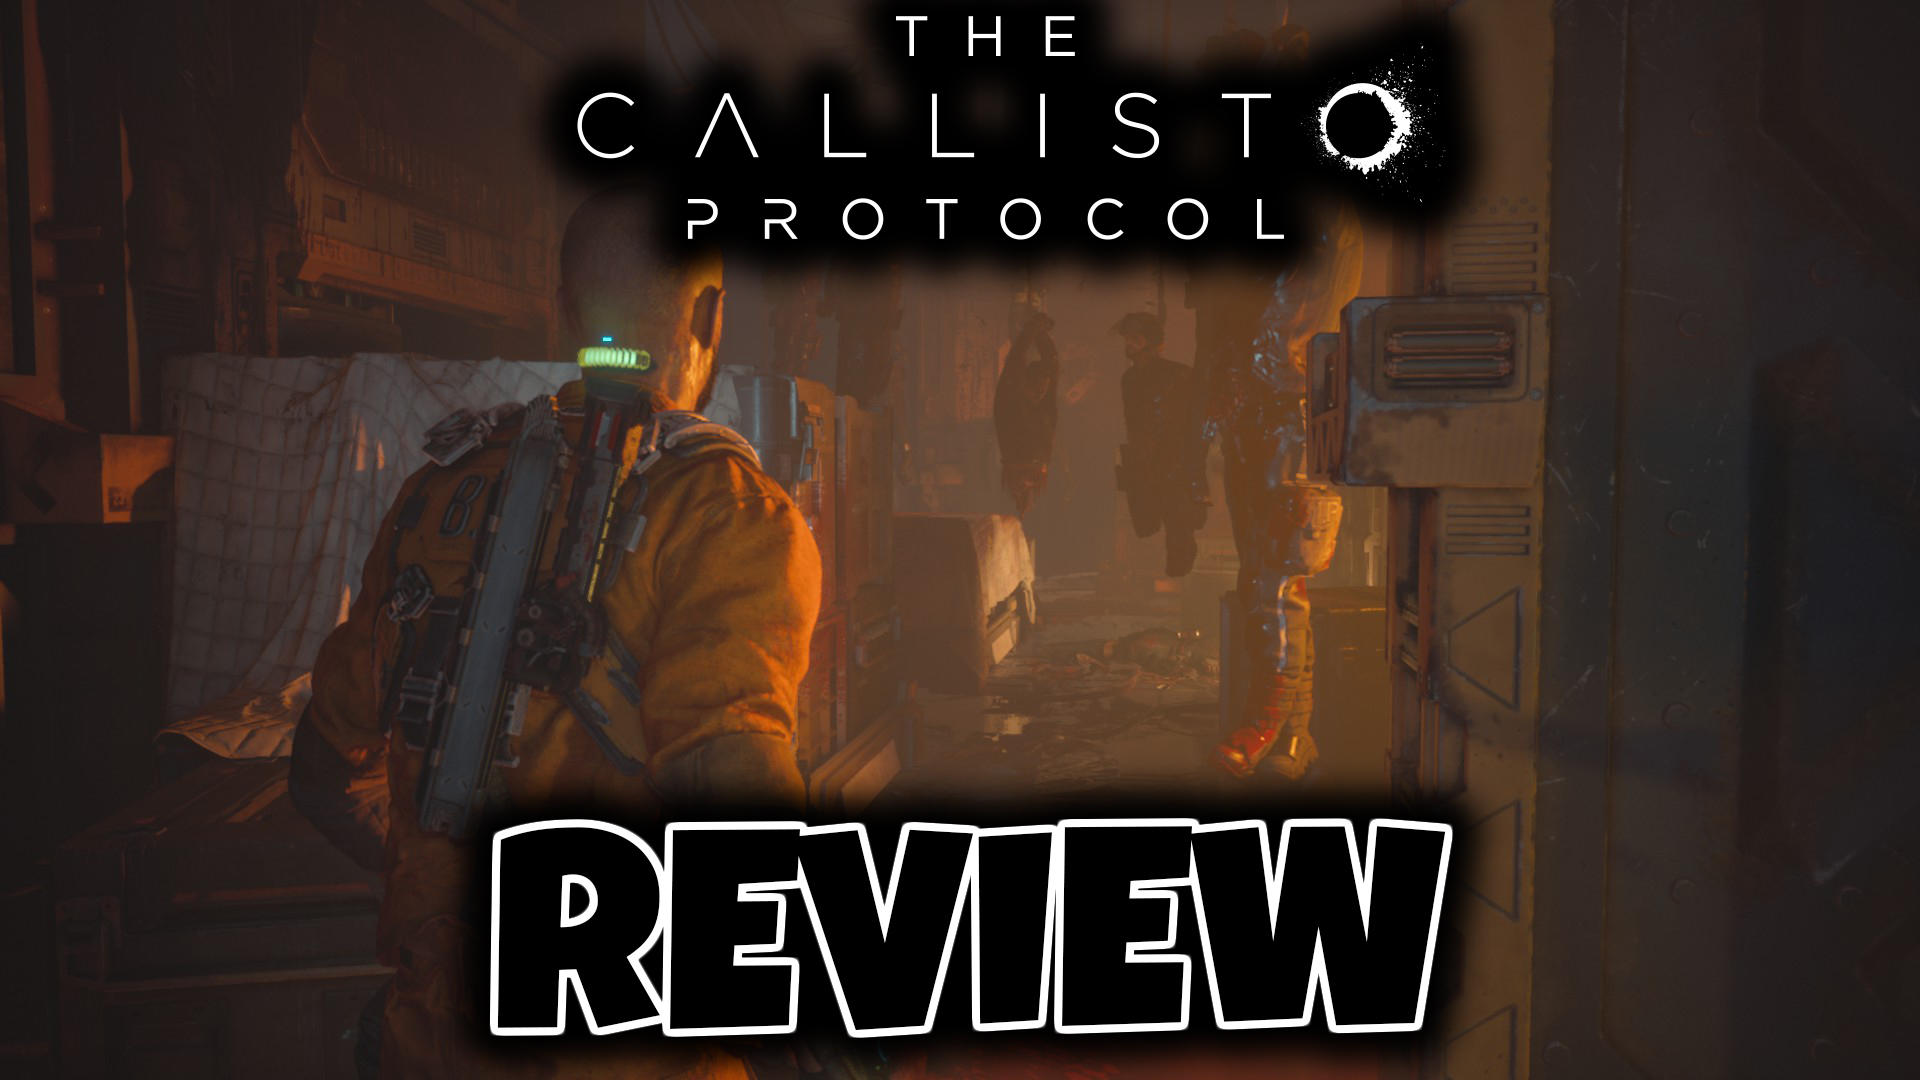 The Callisto Protocol review: terrifying horror with terrifying difficulty  spikes - The Verge